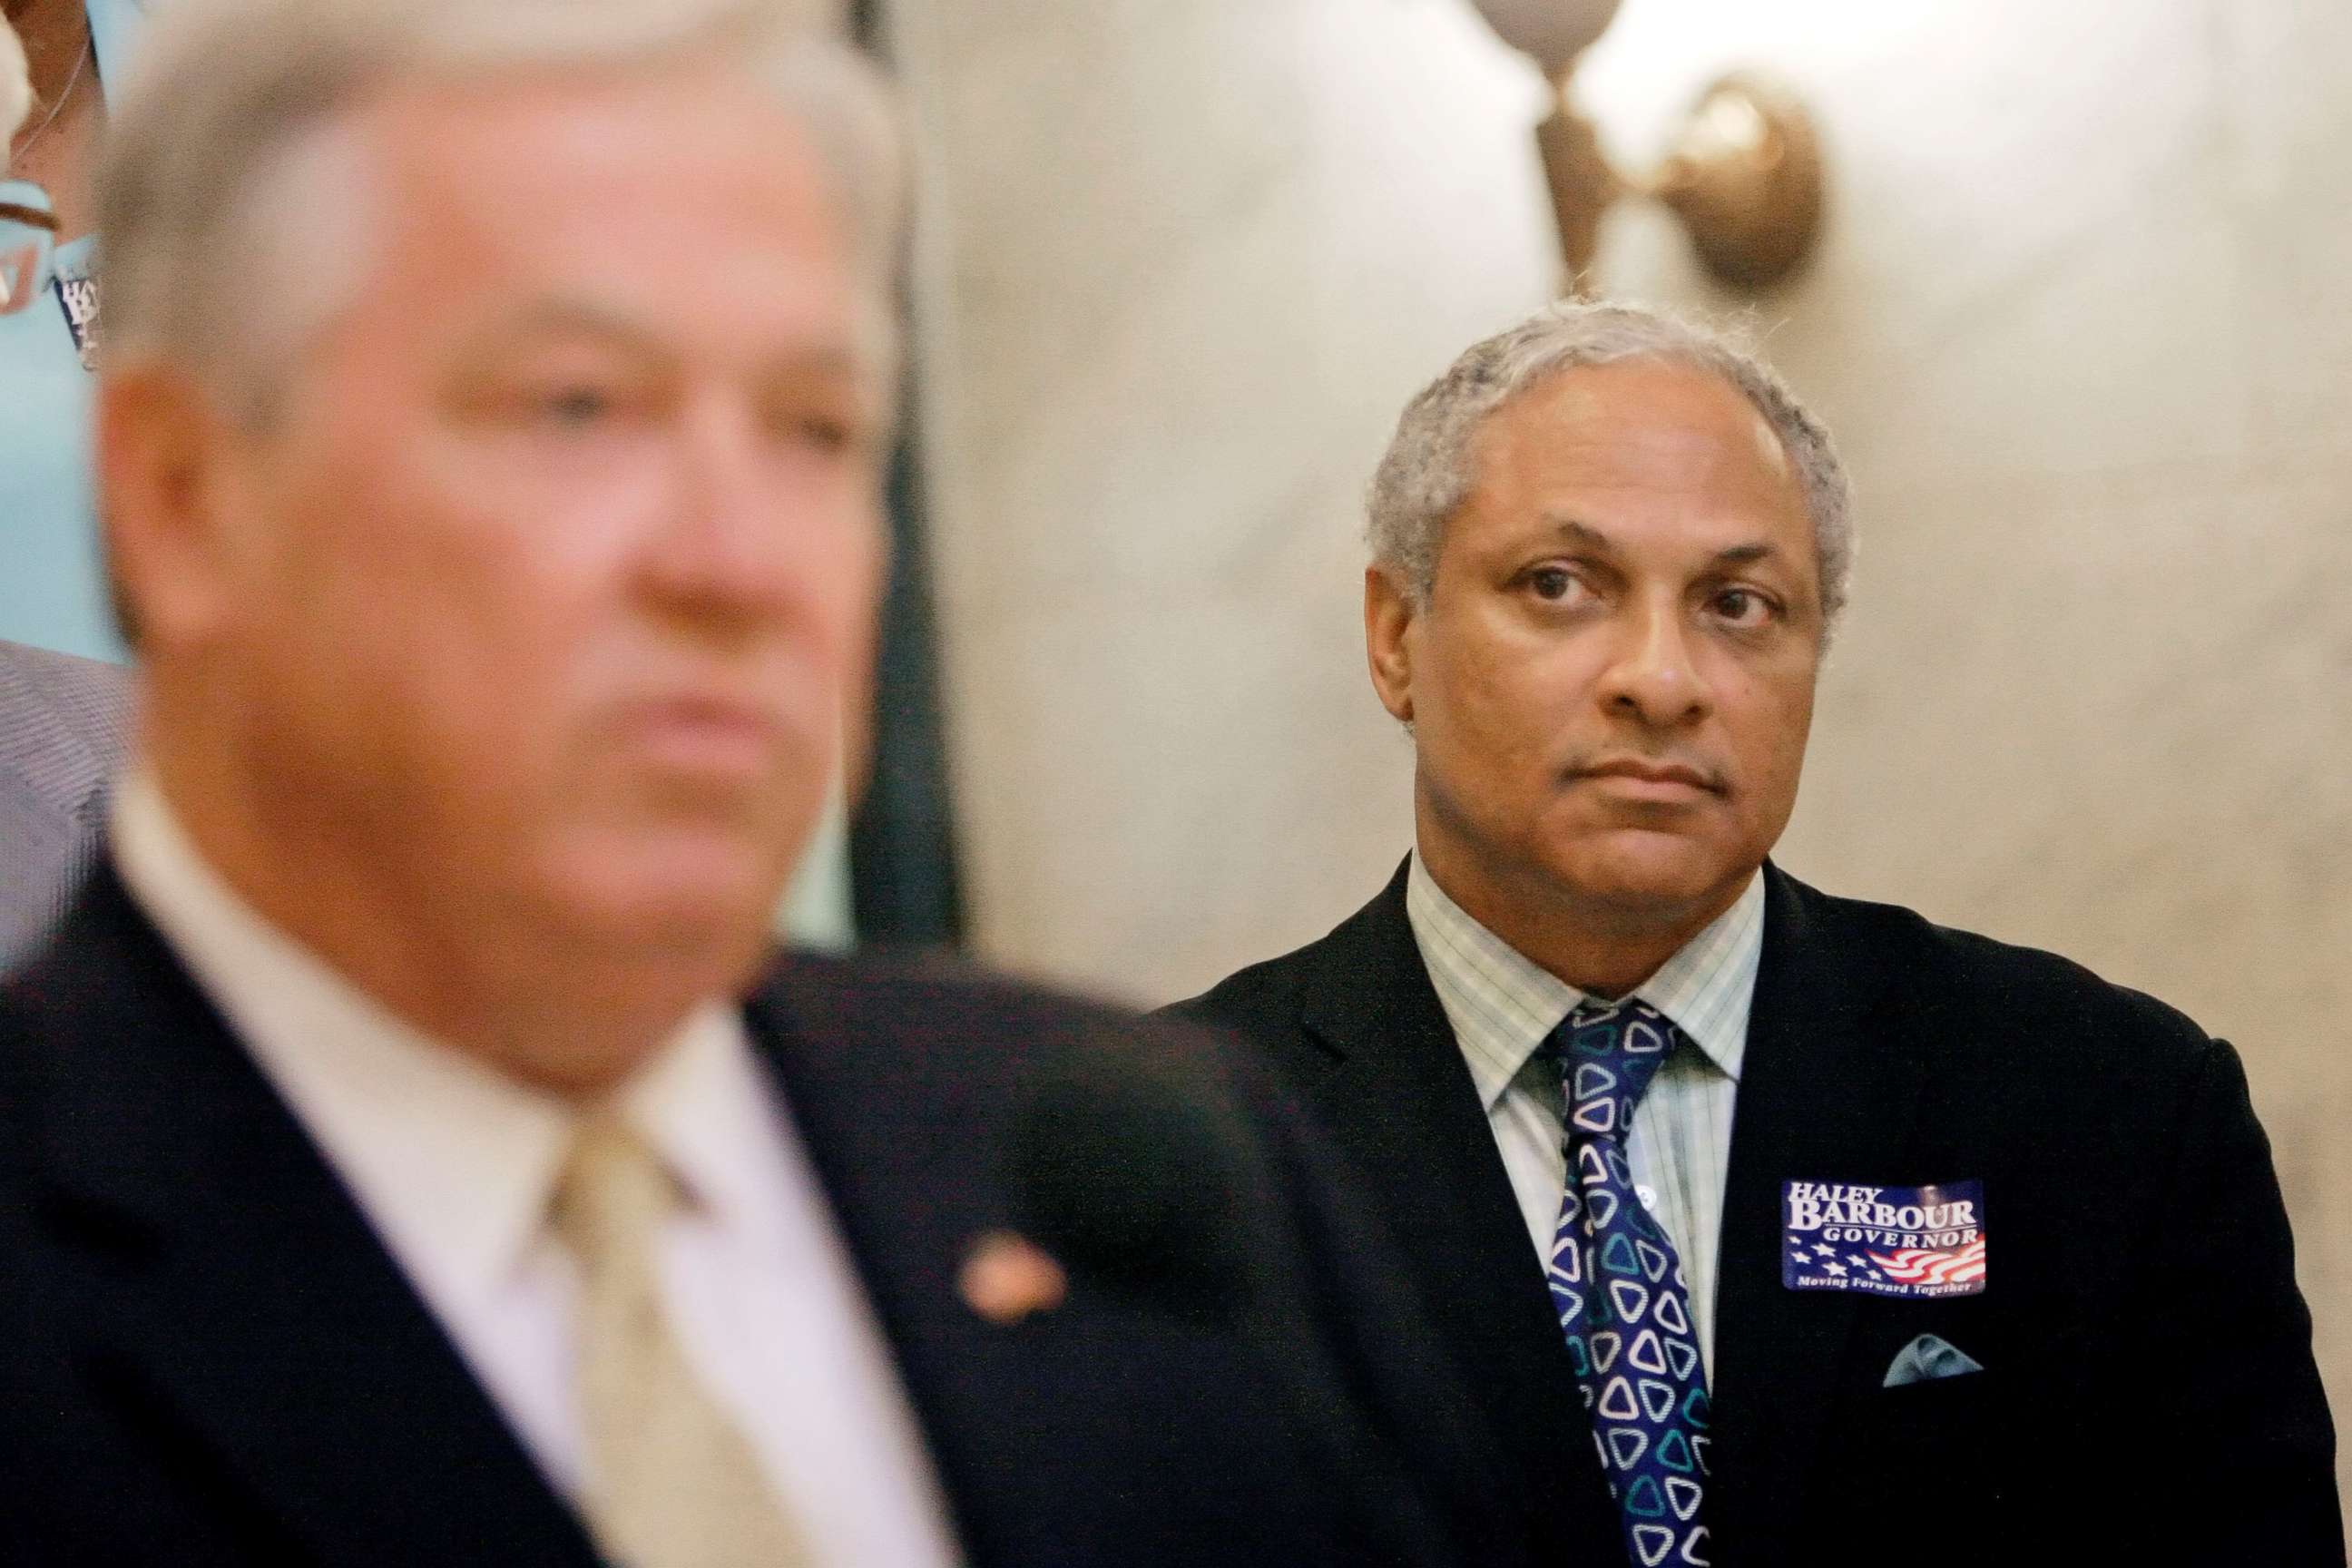 PHOTO: Mike Espy listens to Gov. Haley Barbour during a news conference, Wednesday, Oct. 17, 2007, at the Capitol in Jackson, Miss.